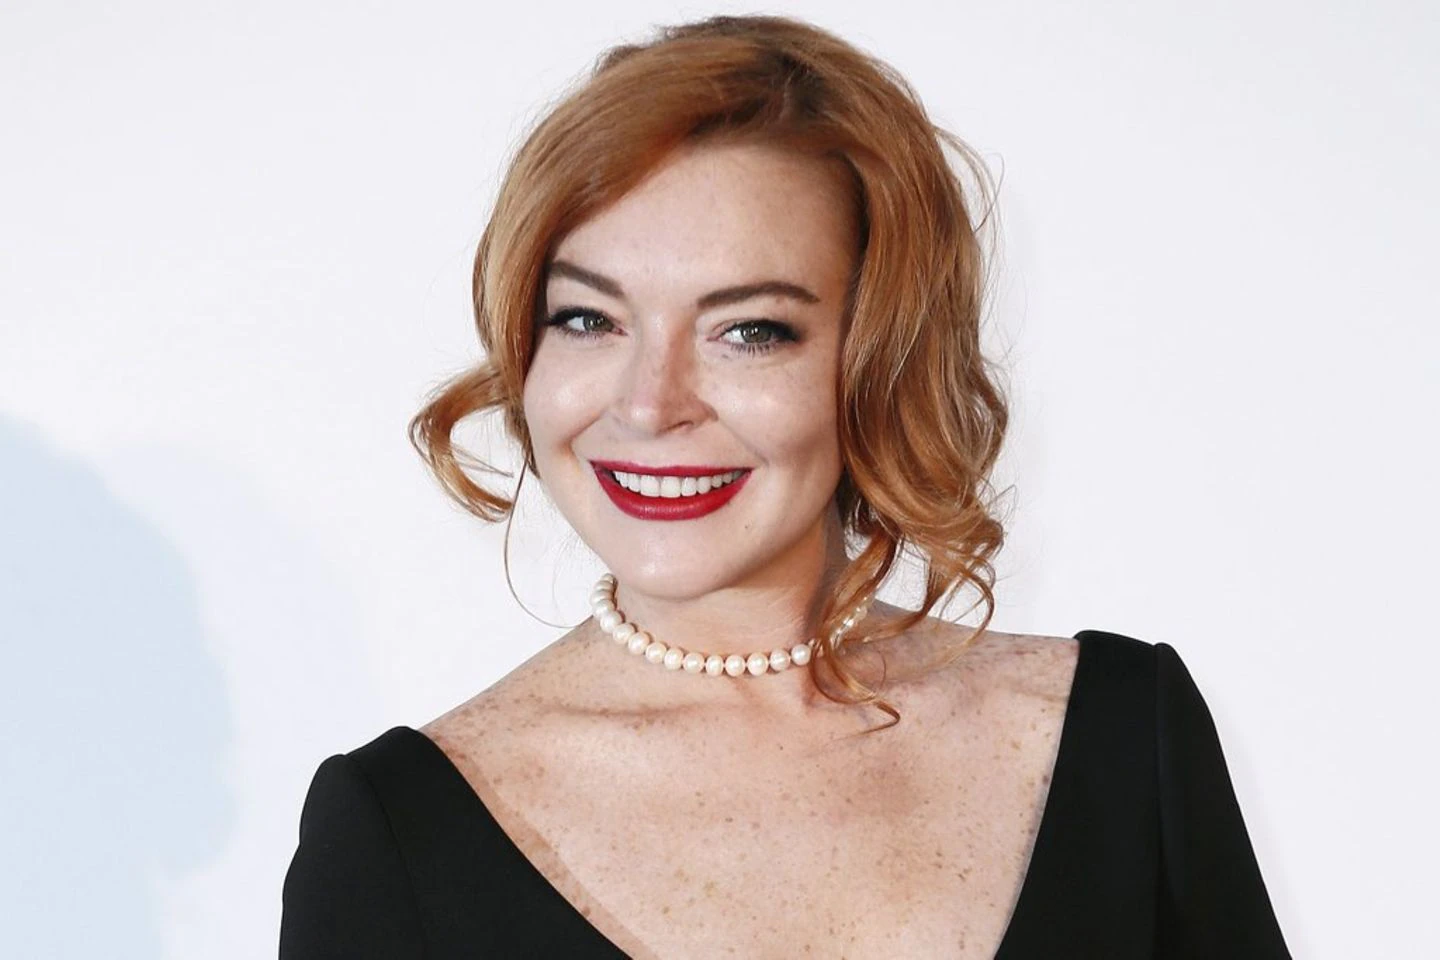 Lindsay Lohan is starring in two new Netflix movies.